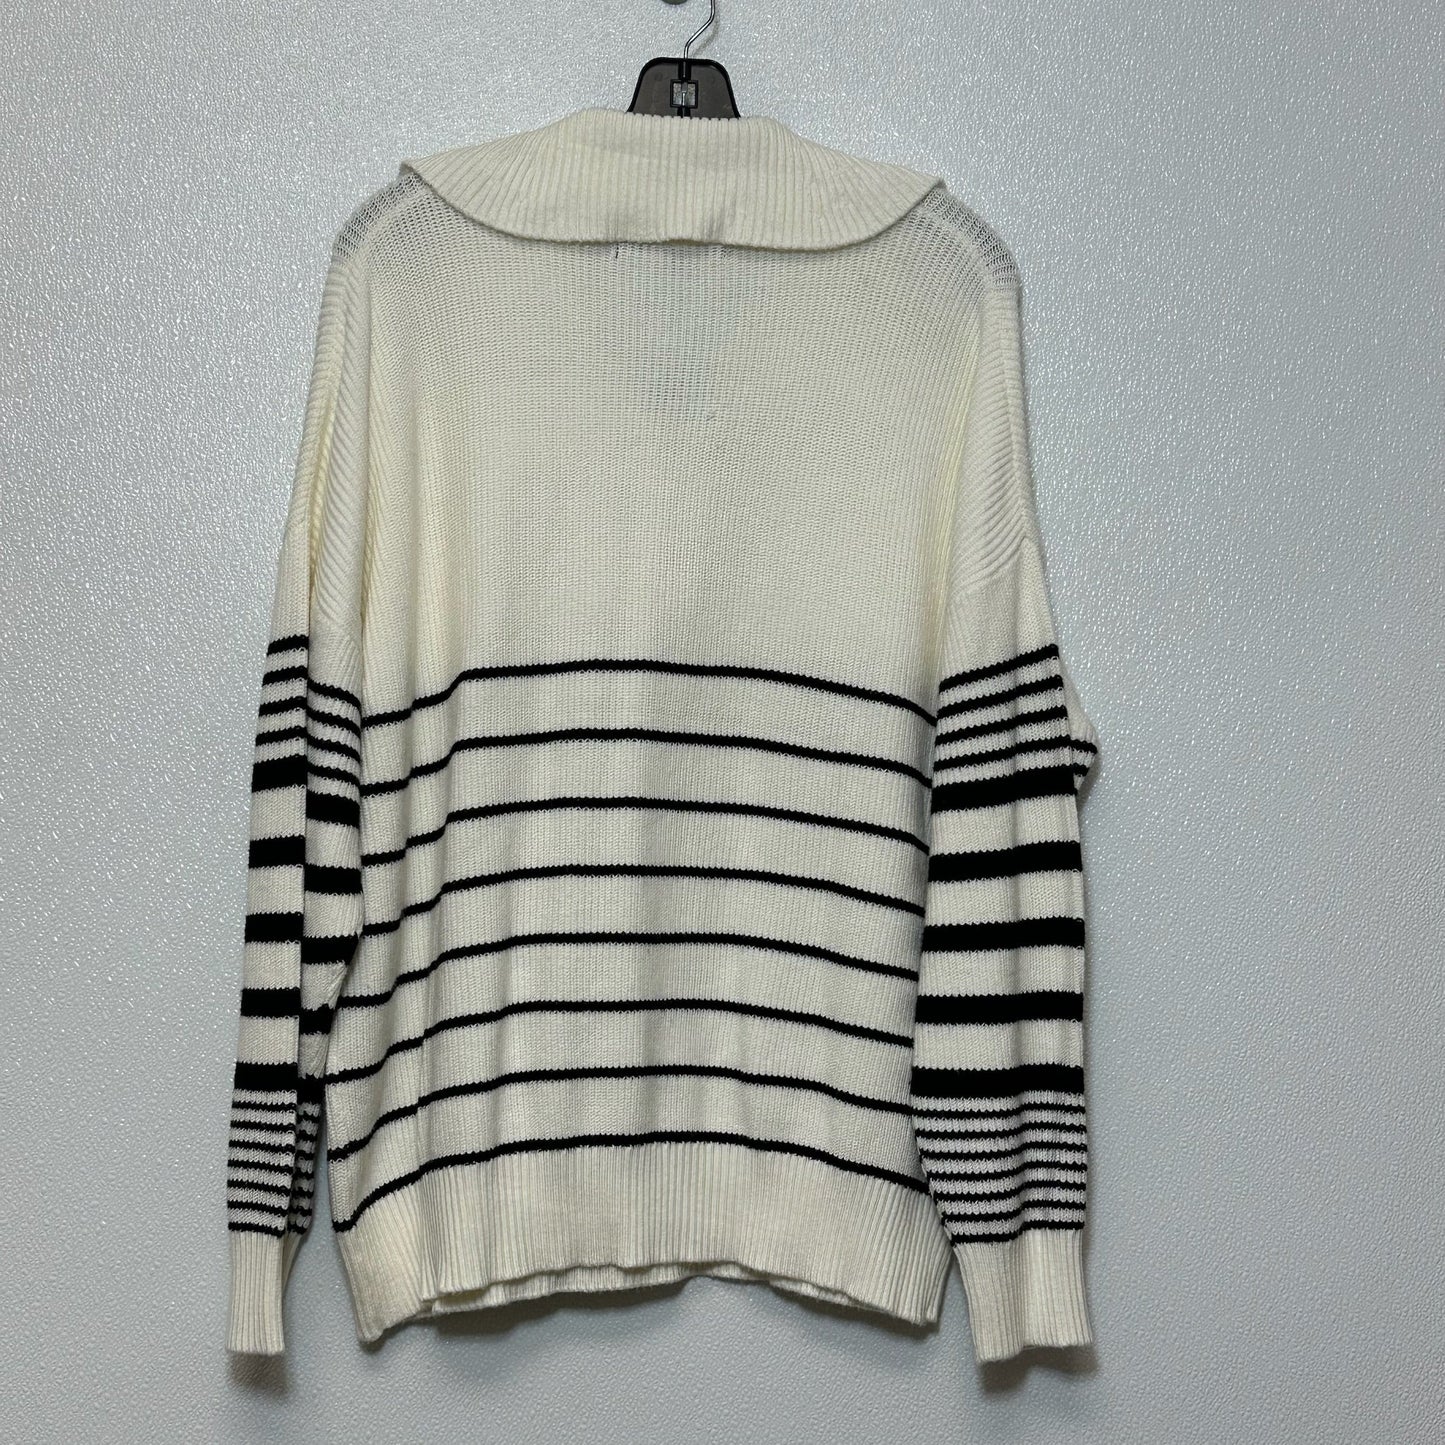 Sweater By Marc New York  Size: Xl